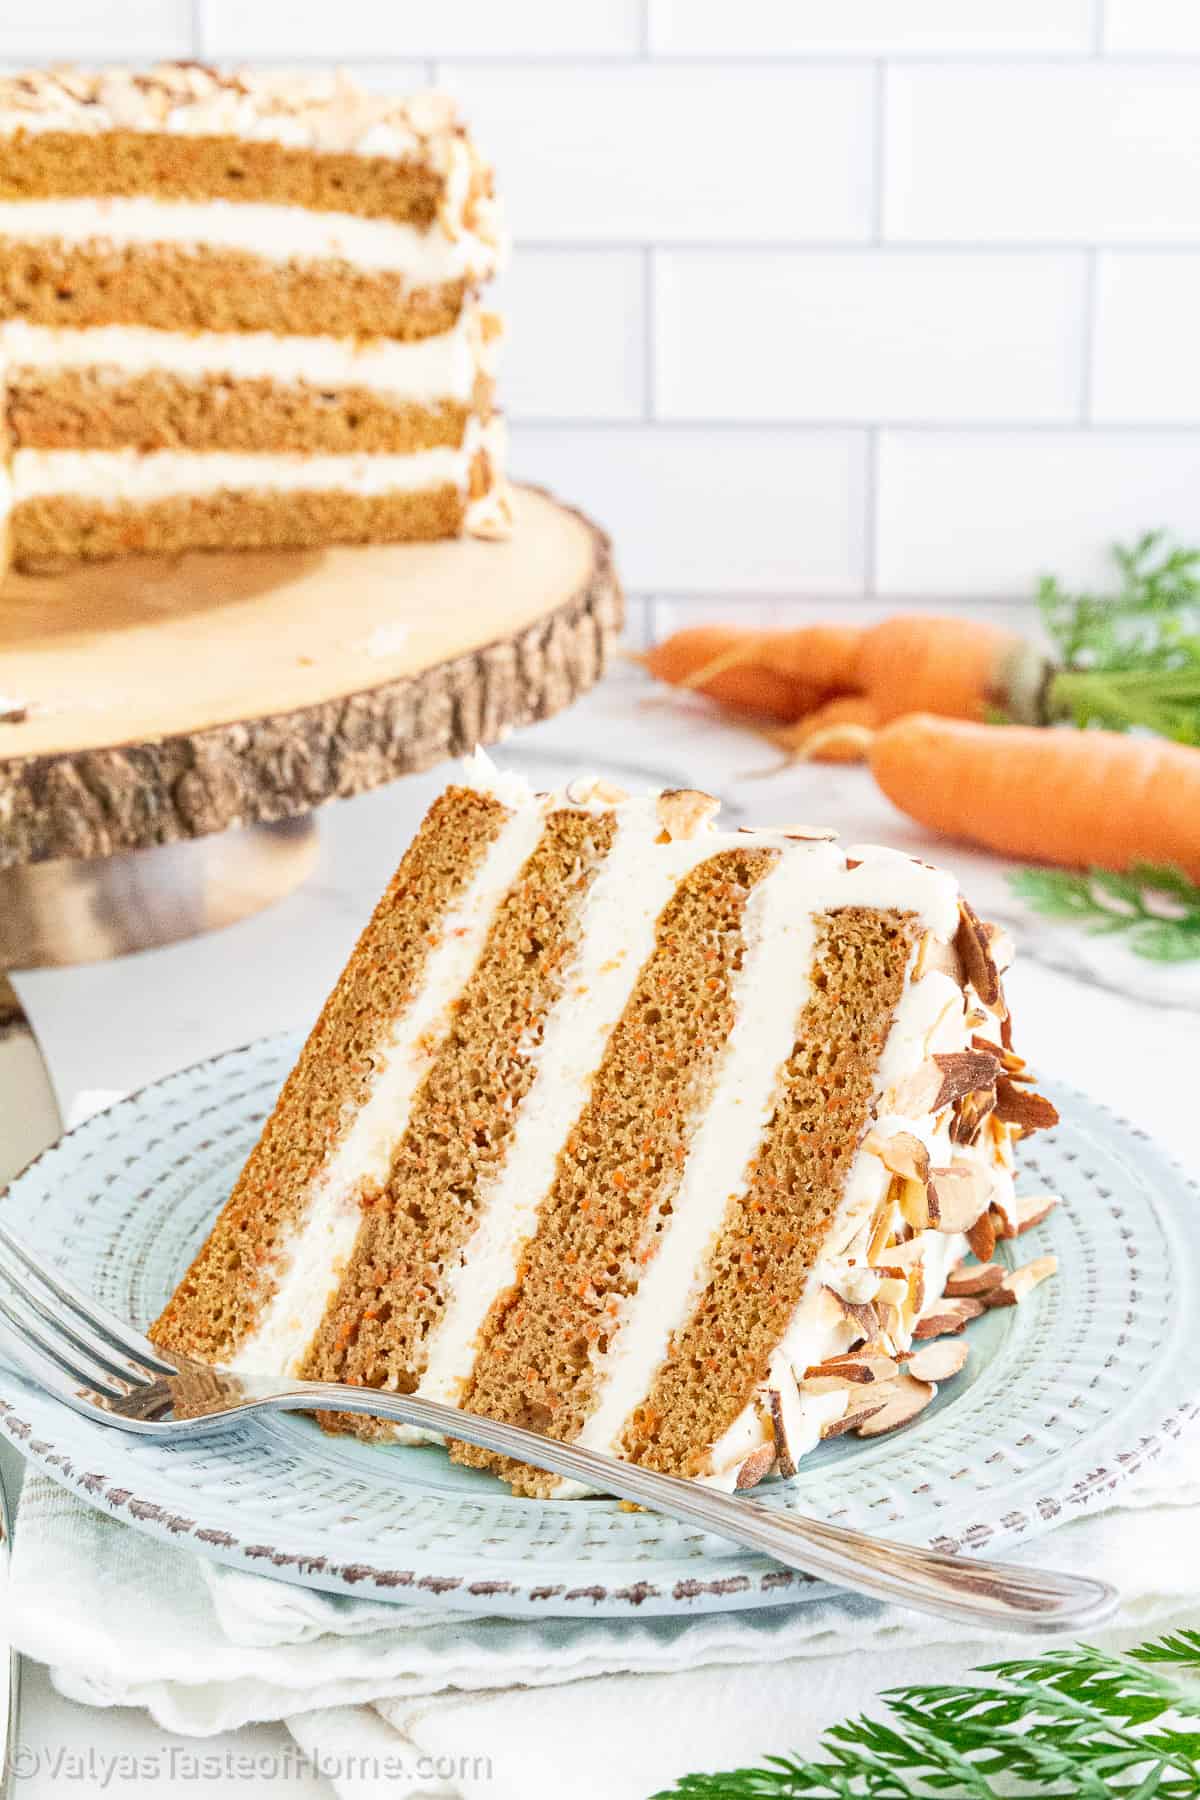 This stuff is truly delicious! The best thing is that it's a much healthier version than your original carrot cake.